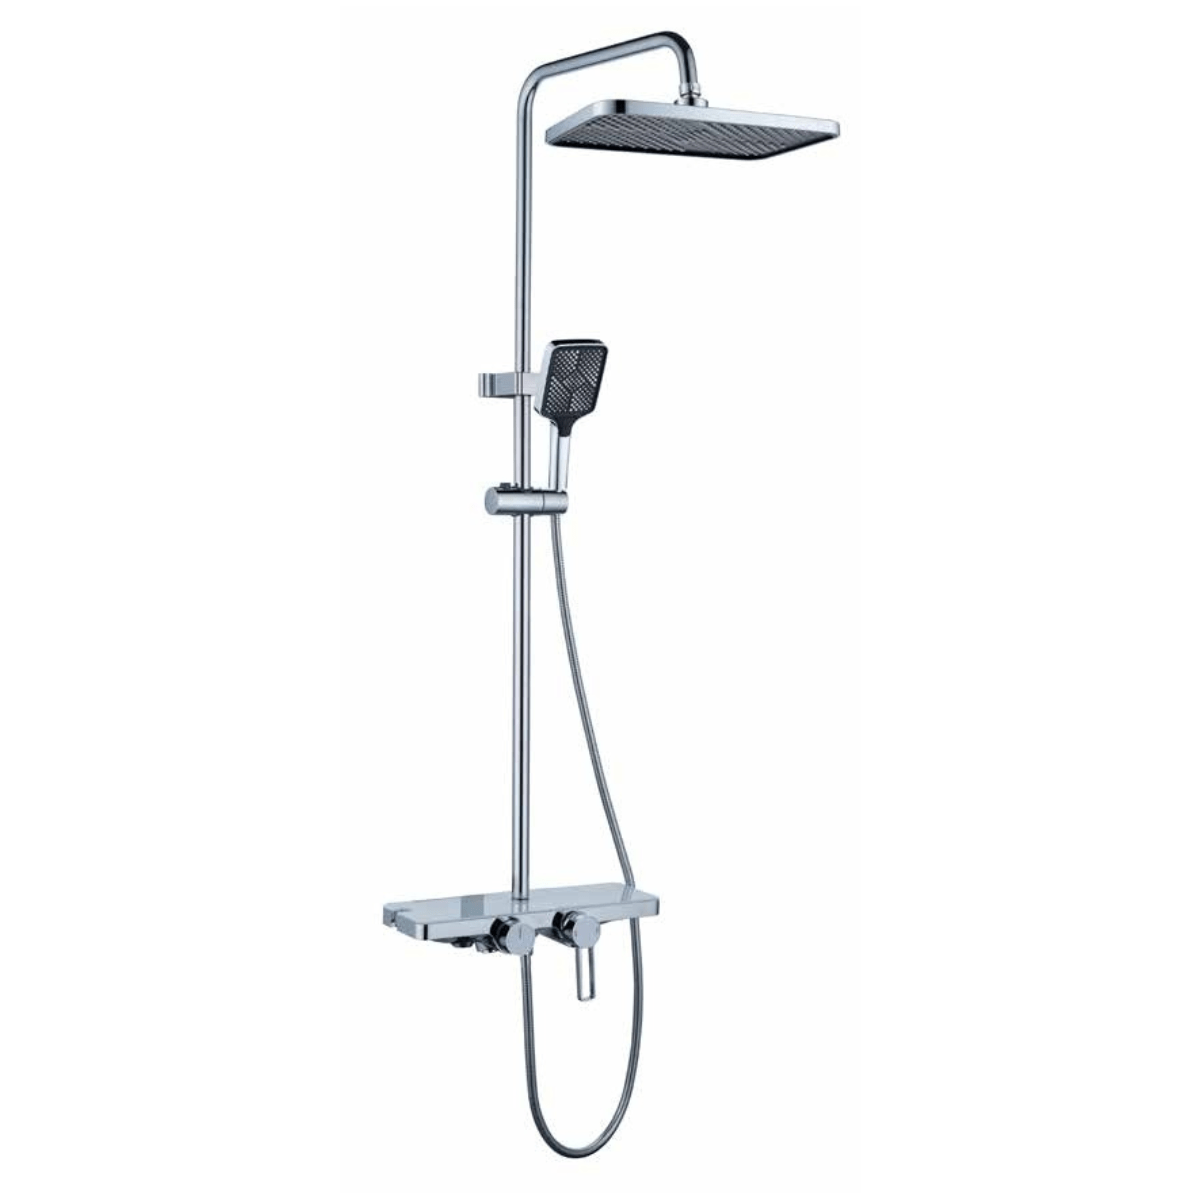 Buy WK Bathroom Chrome Wall Mounted Three-Function Square Rain Shower Set - K-8848 | Shop at Supply Master Accra, Ghana Shower Set Buy Tools hardware Building materials